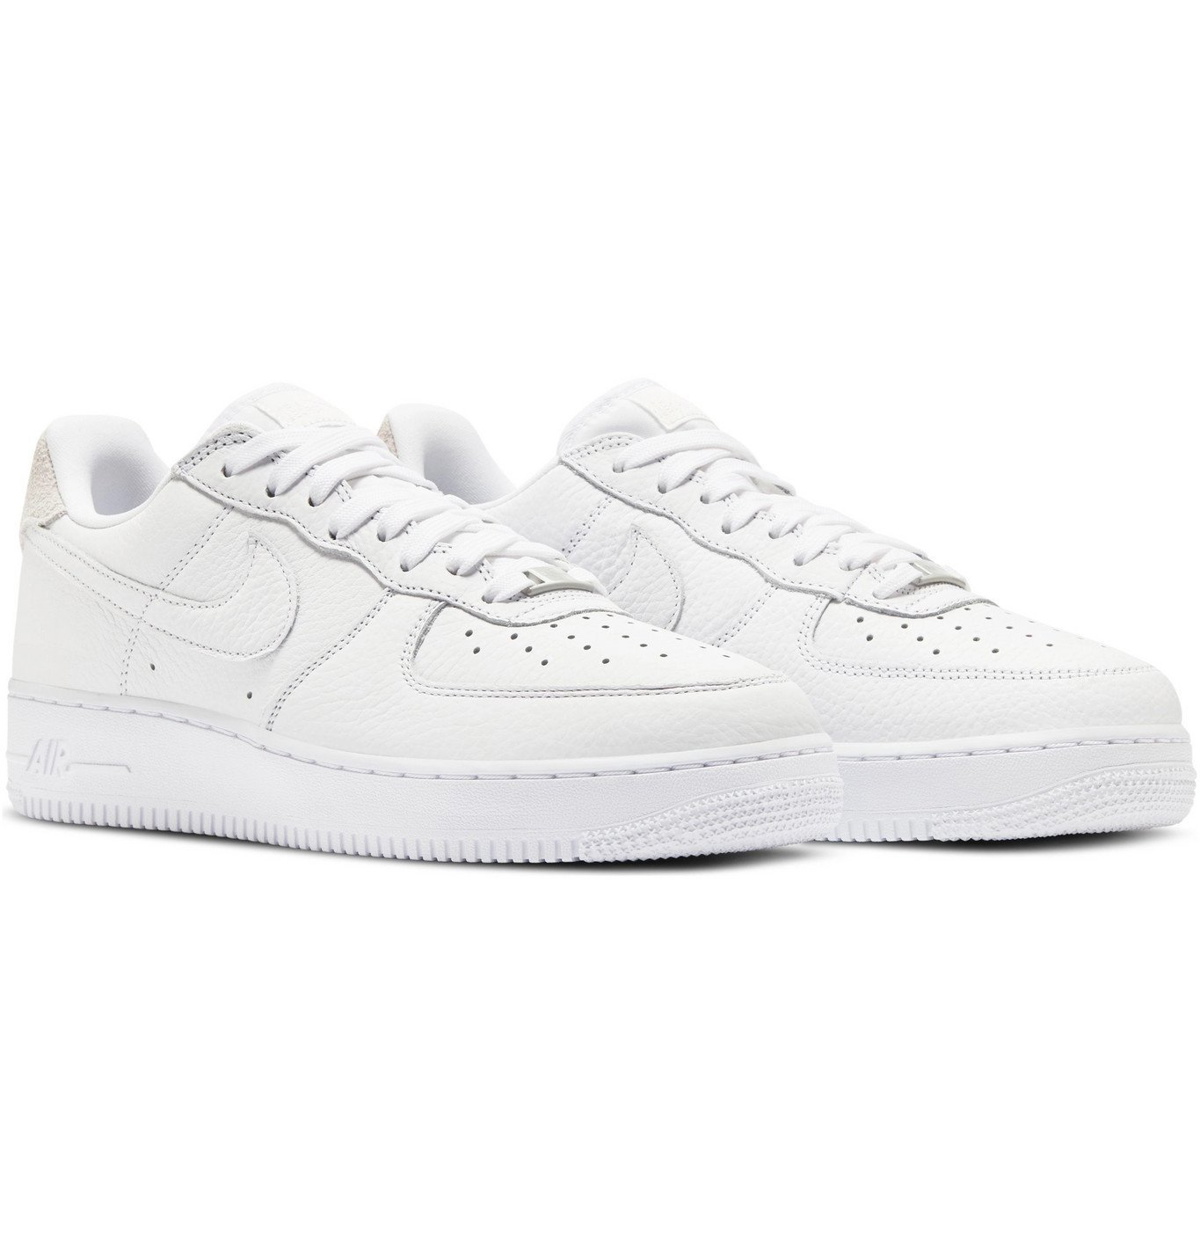 Scarp hout verhaal Nike - Air Force 1 07 Suede-Trimmed Leather Sneakers - White Nike